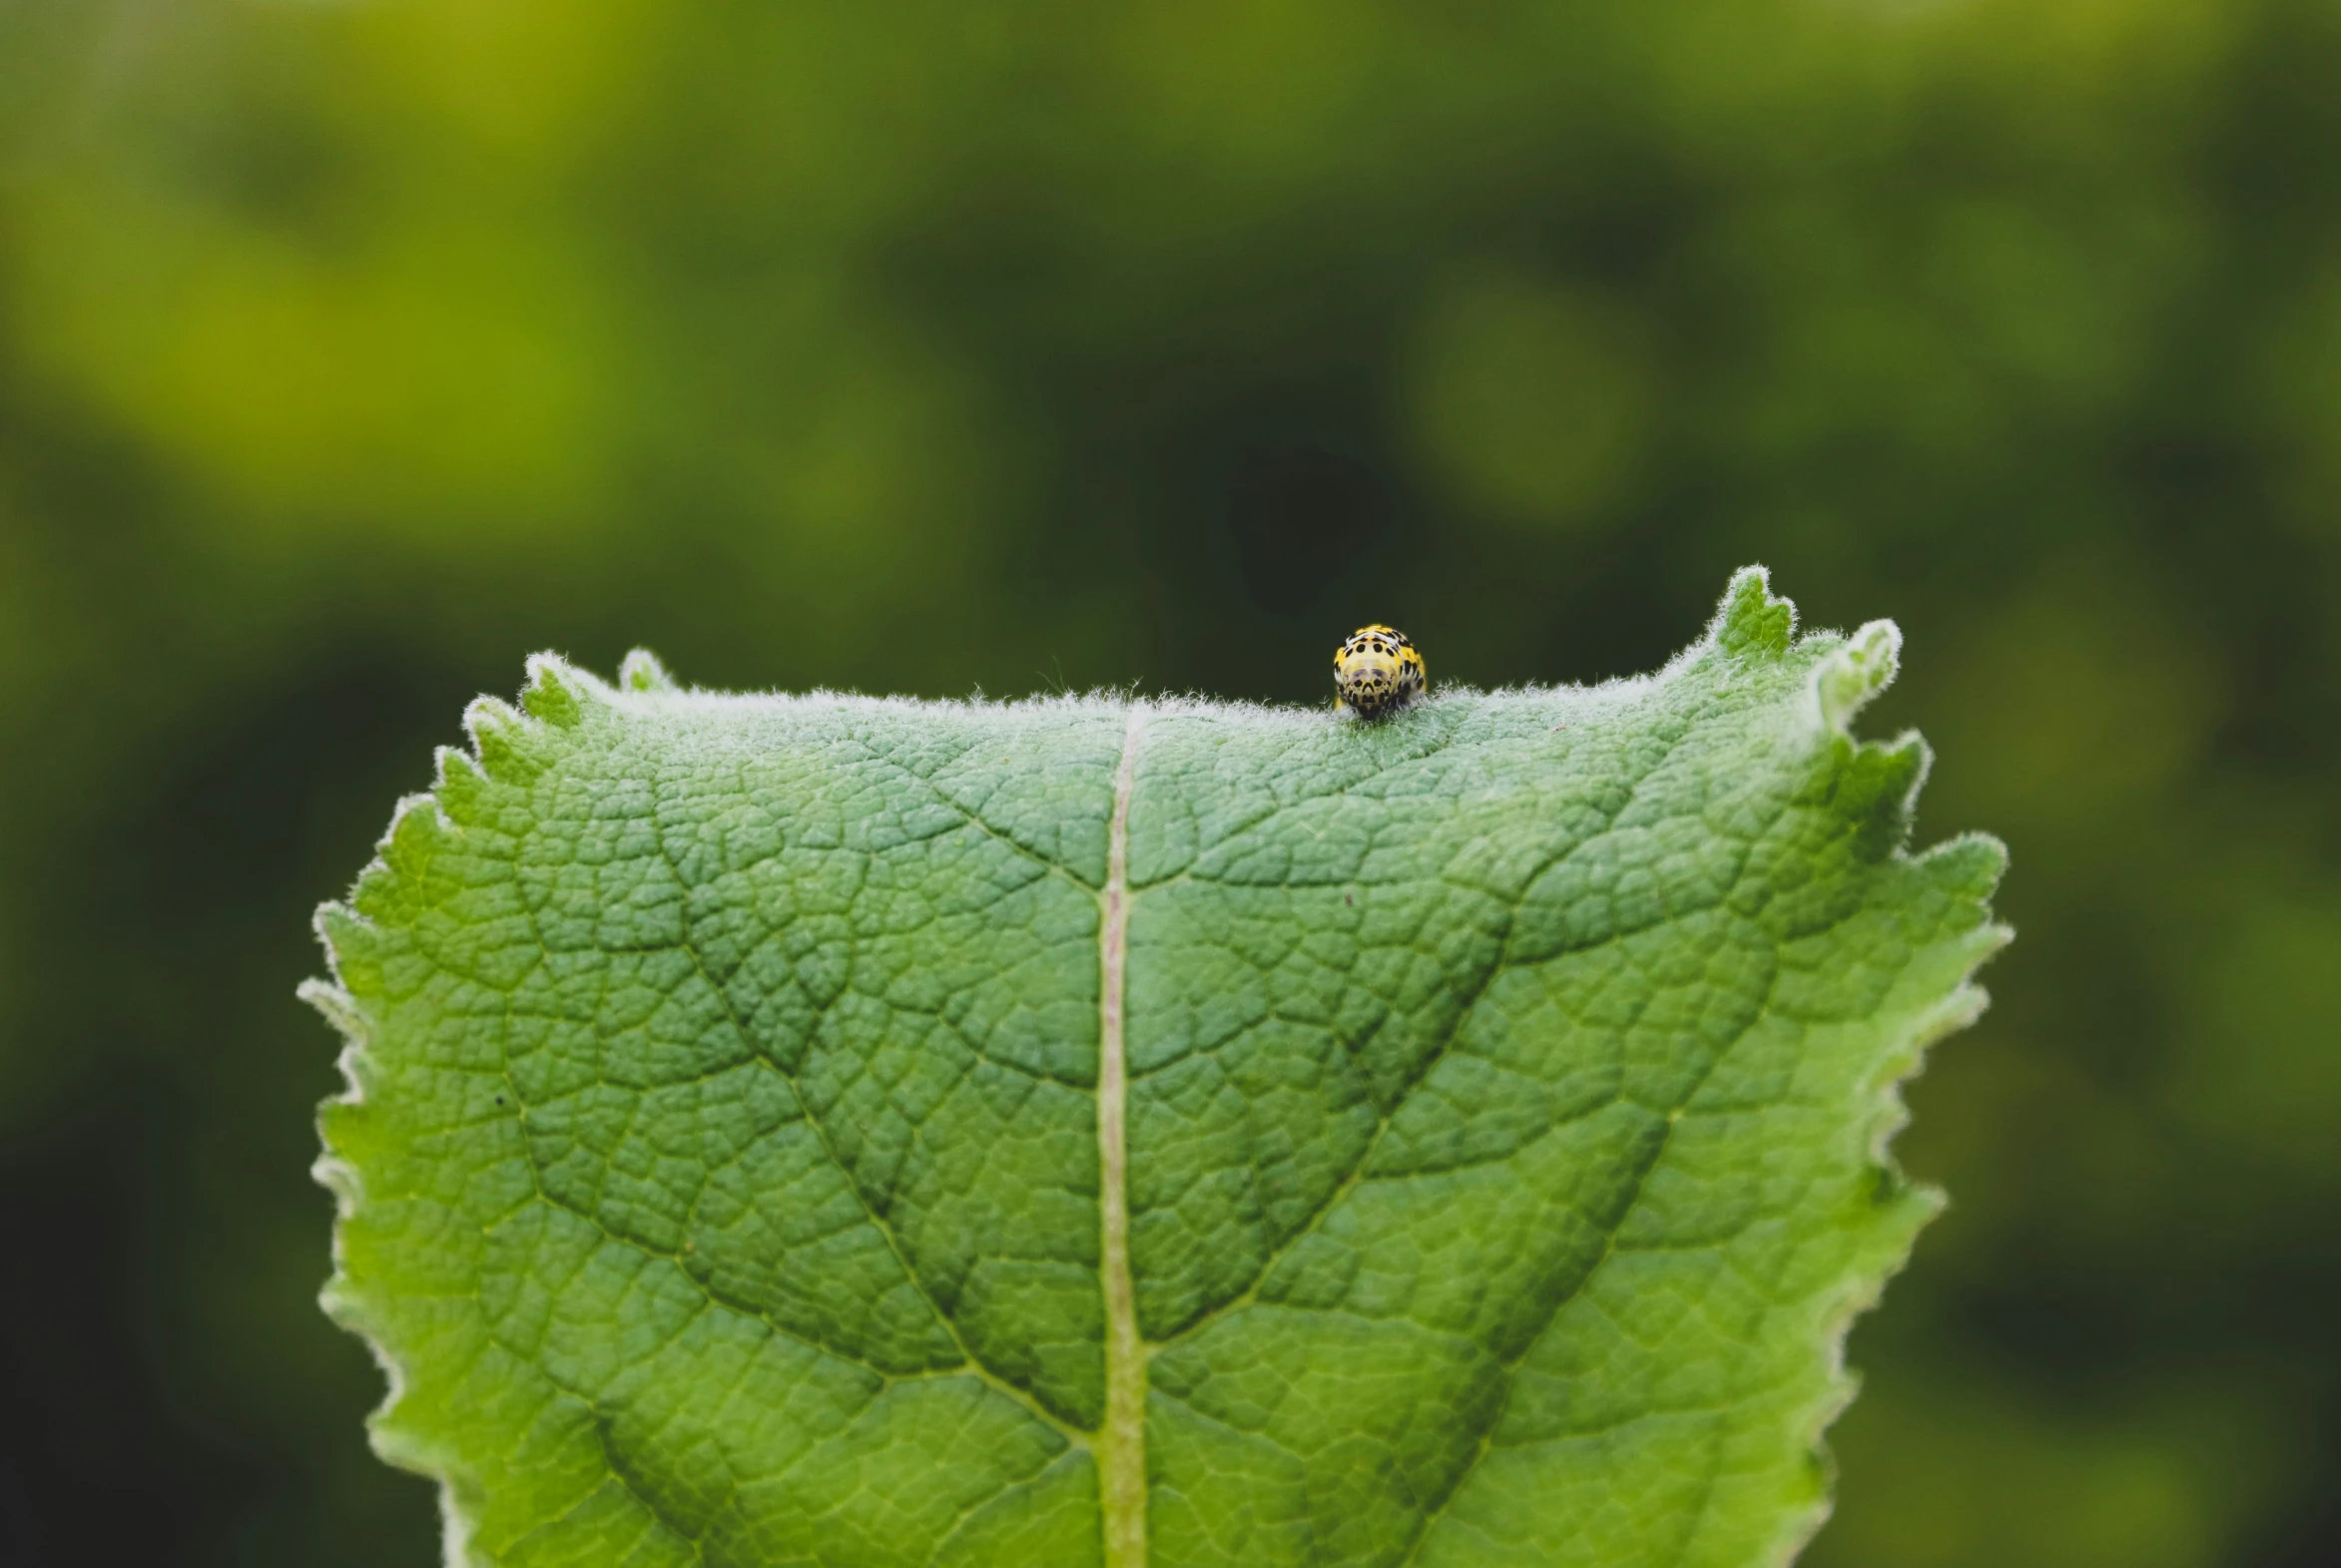 a small bug is sitting on the green leaf